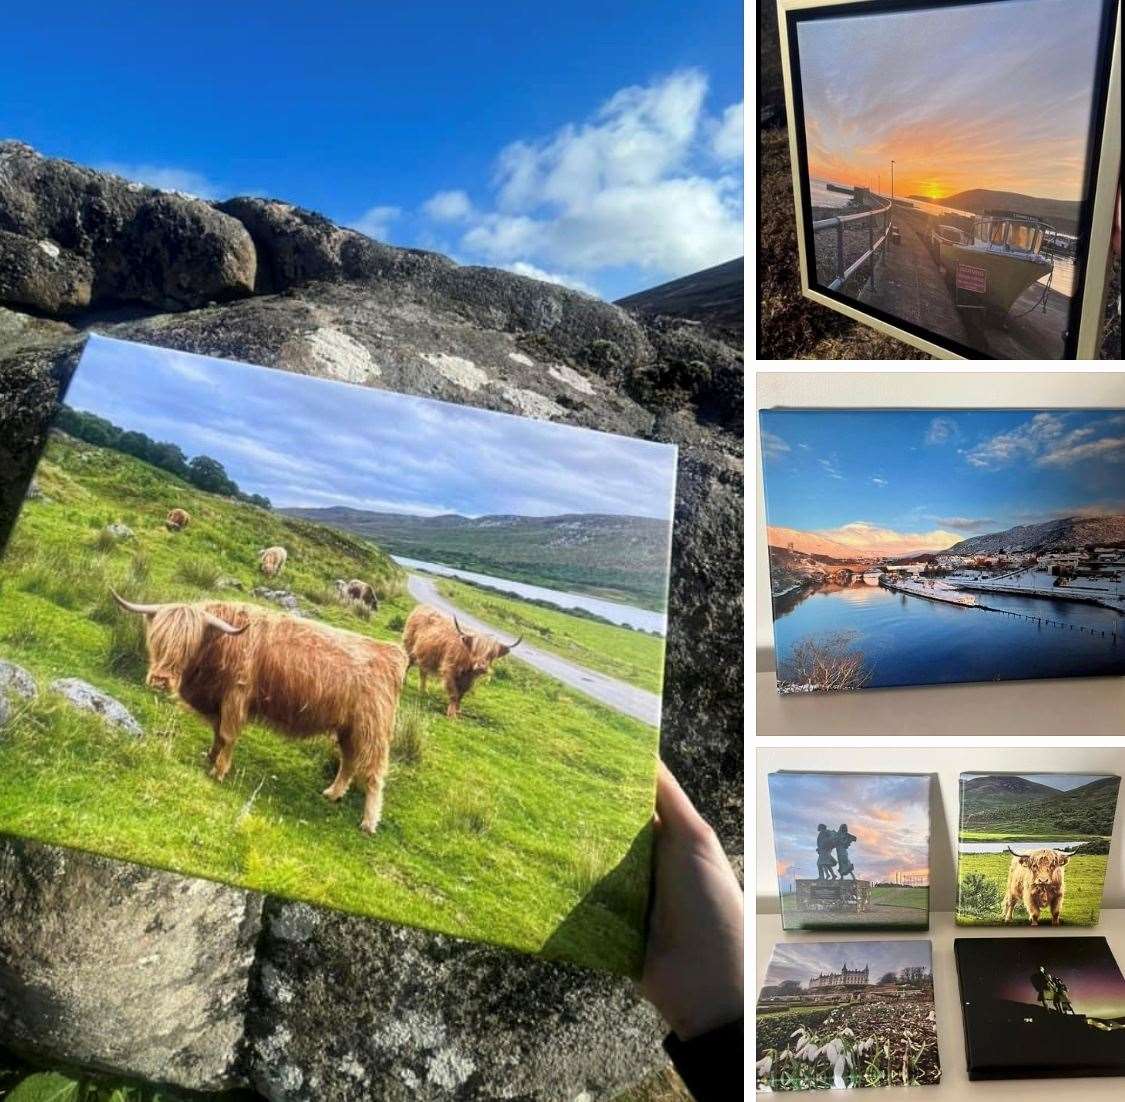 During Covid Kelly used the time as an opportunity to launch her long overdue website, and also found a new love for photography which led to her stocking a wide range of coasters, mugs and canvases featuring her own local images.